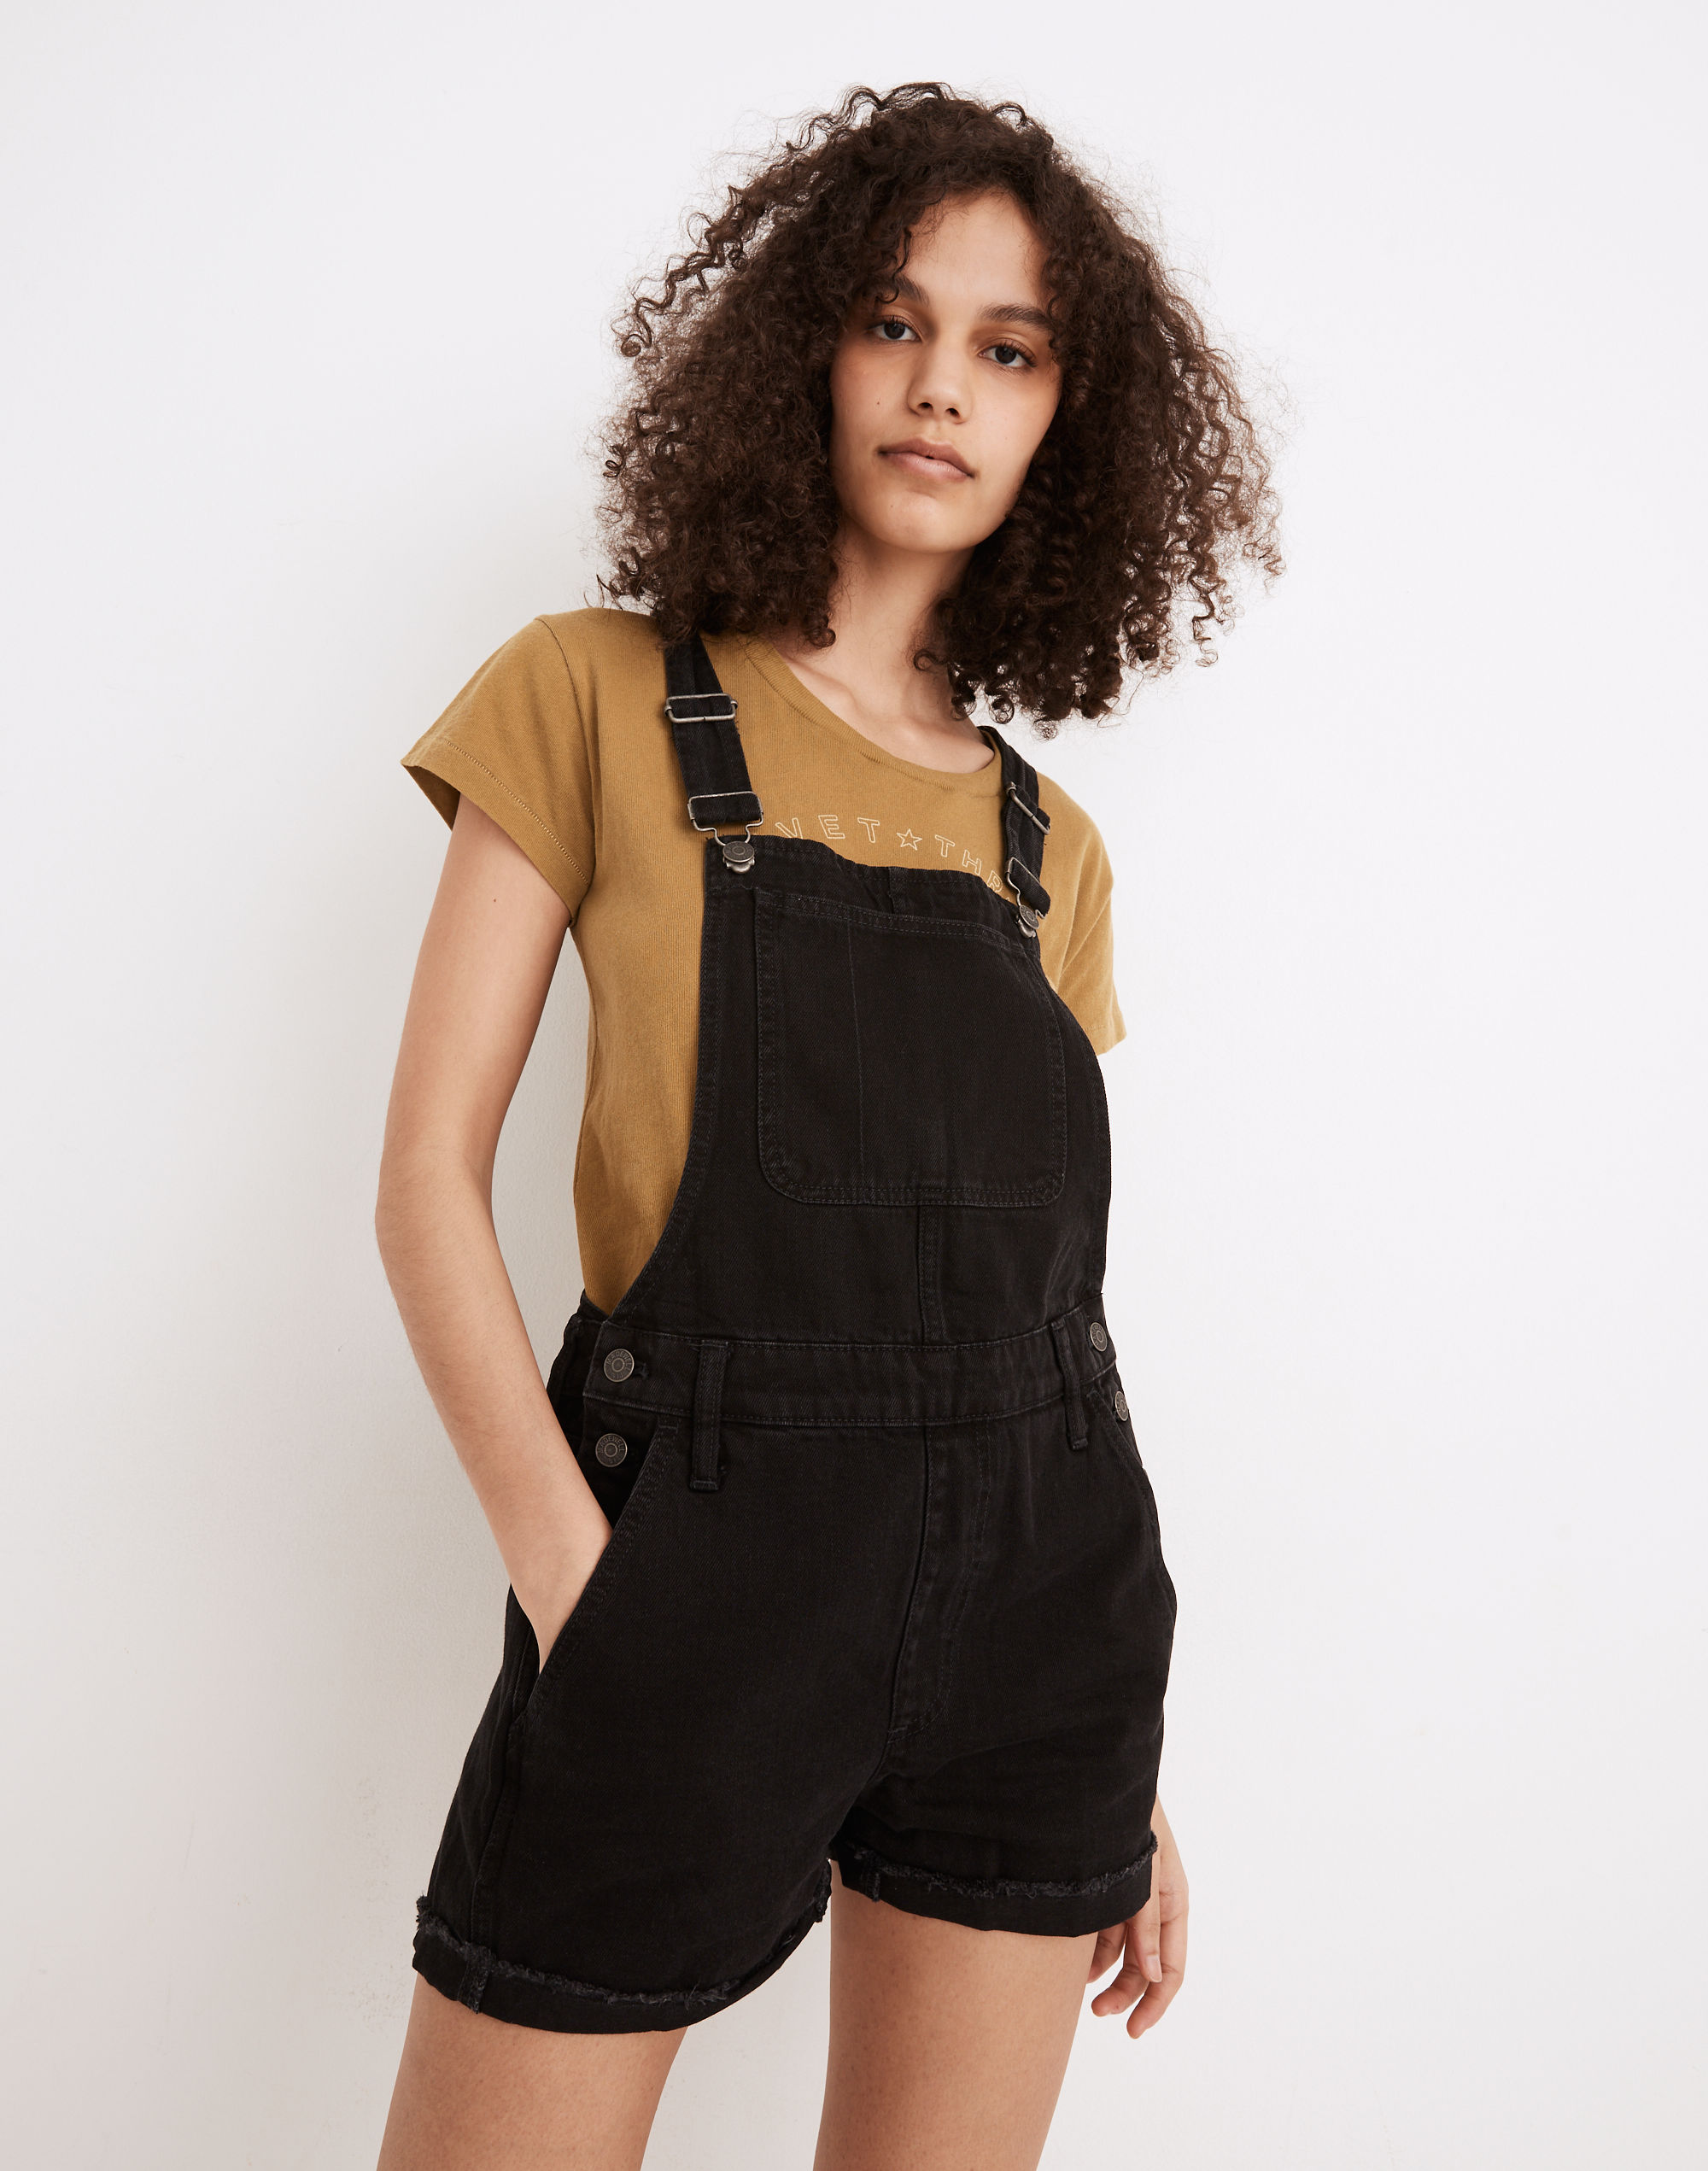 Women's Adirondack Short Overalls in Washed Black